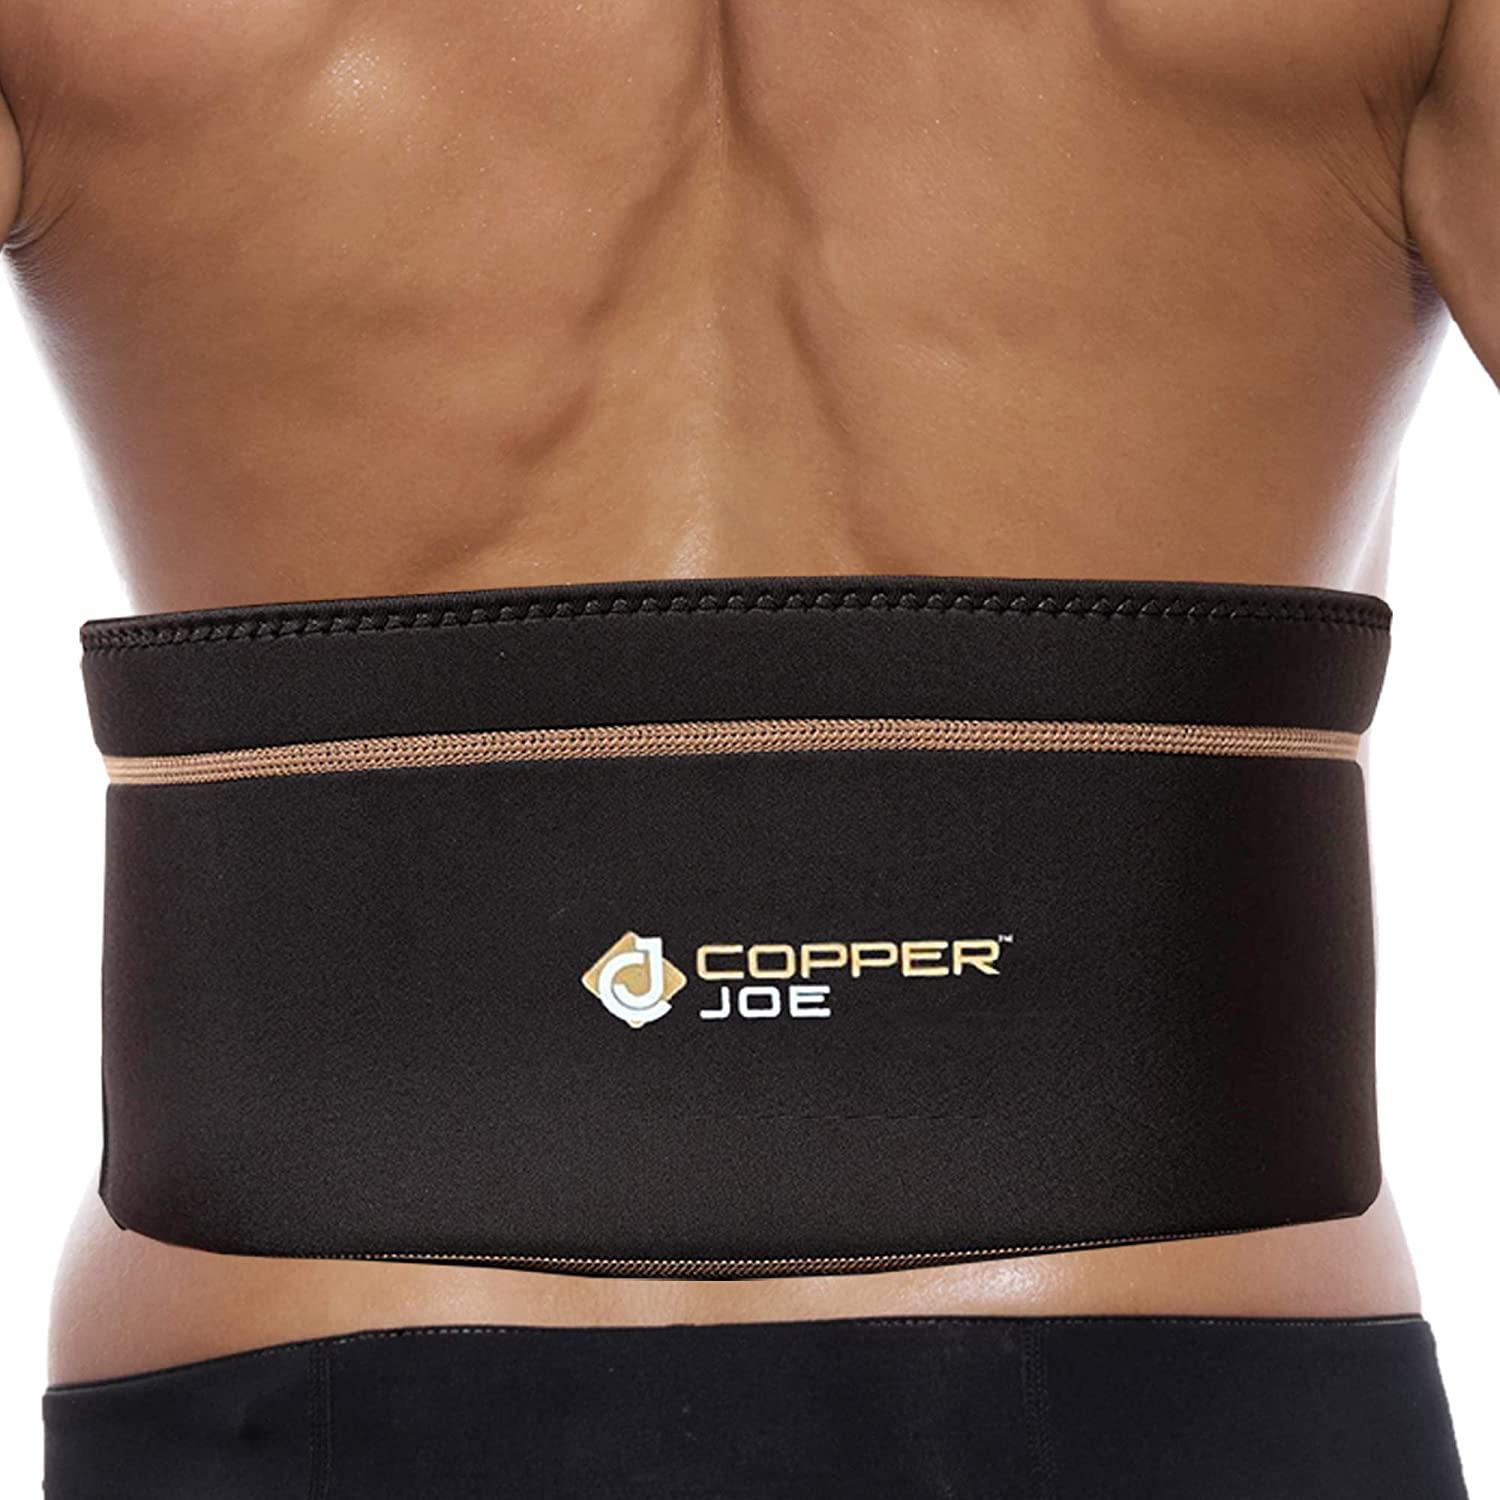 Lower Back Brace for Lumbar Support | PINK